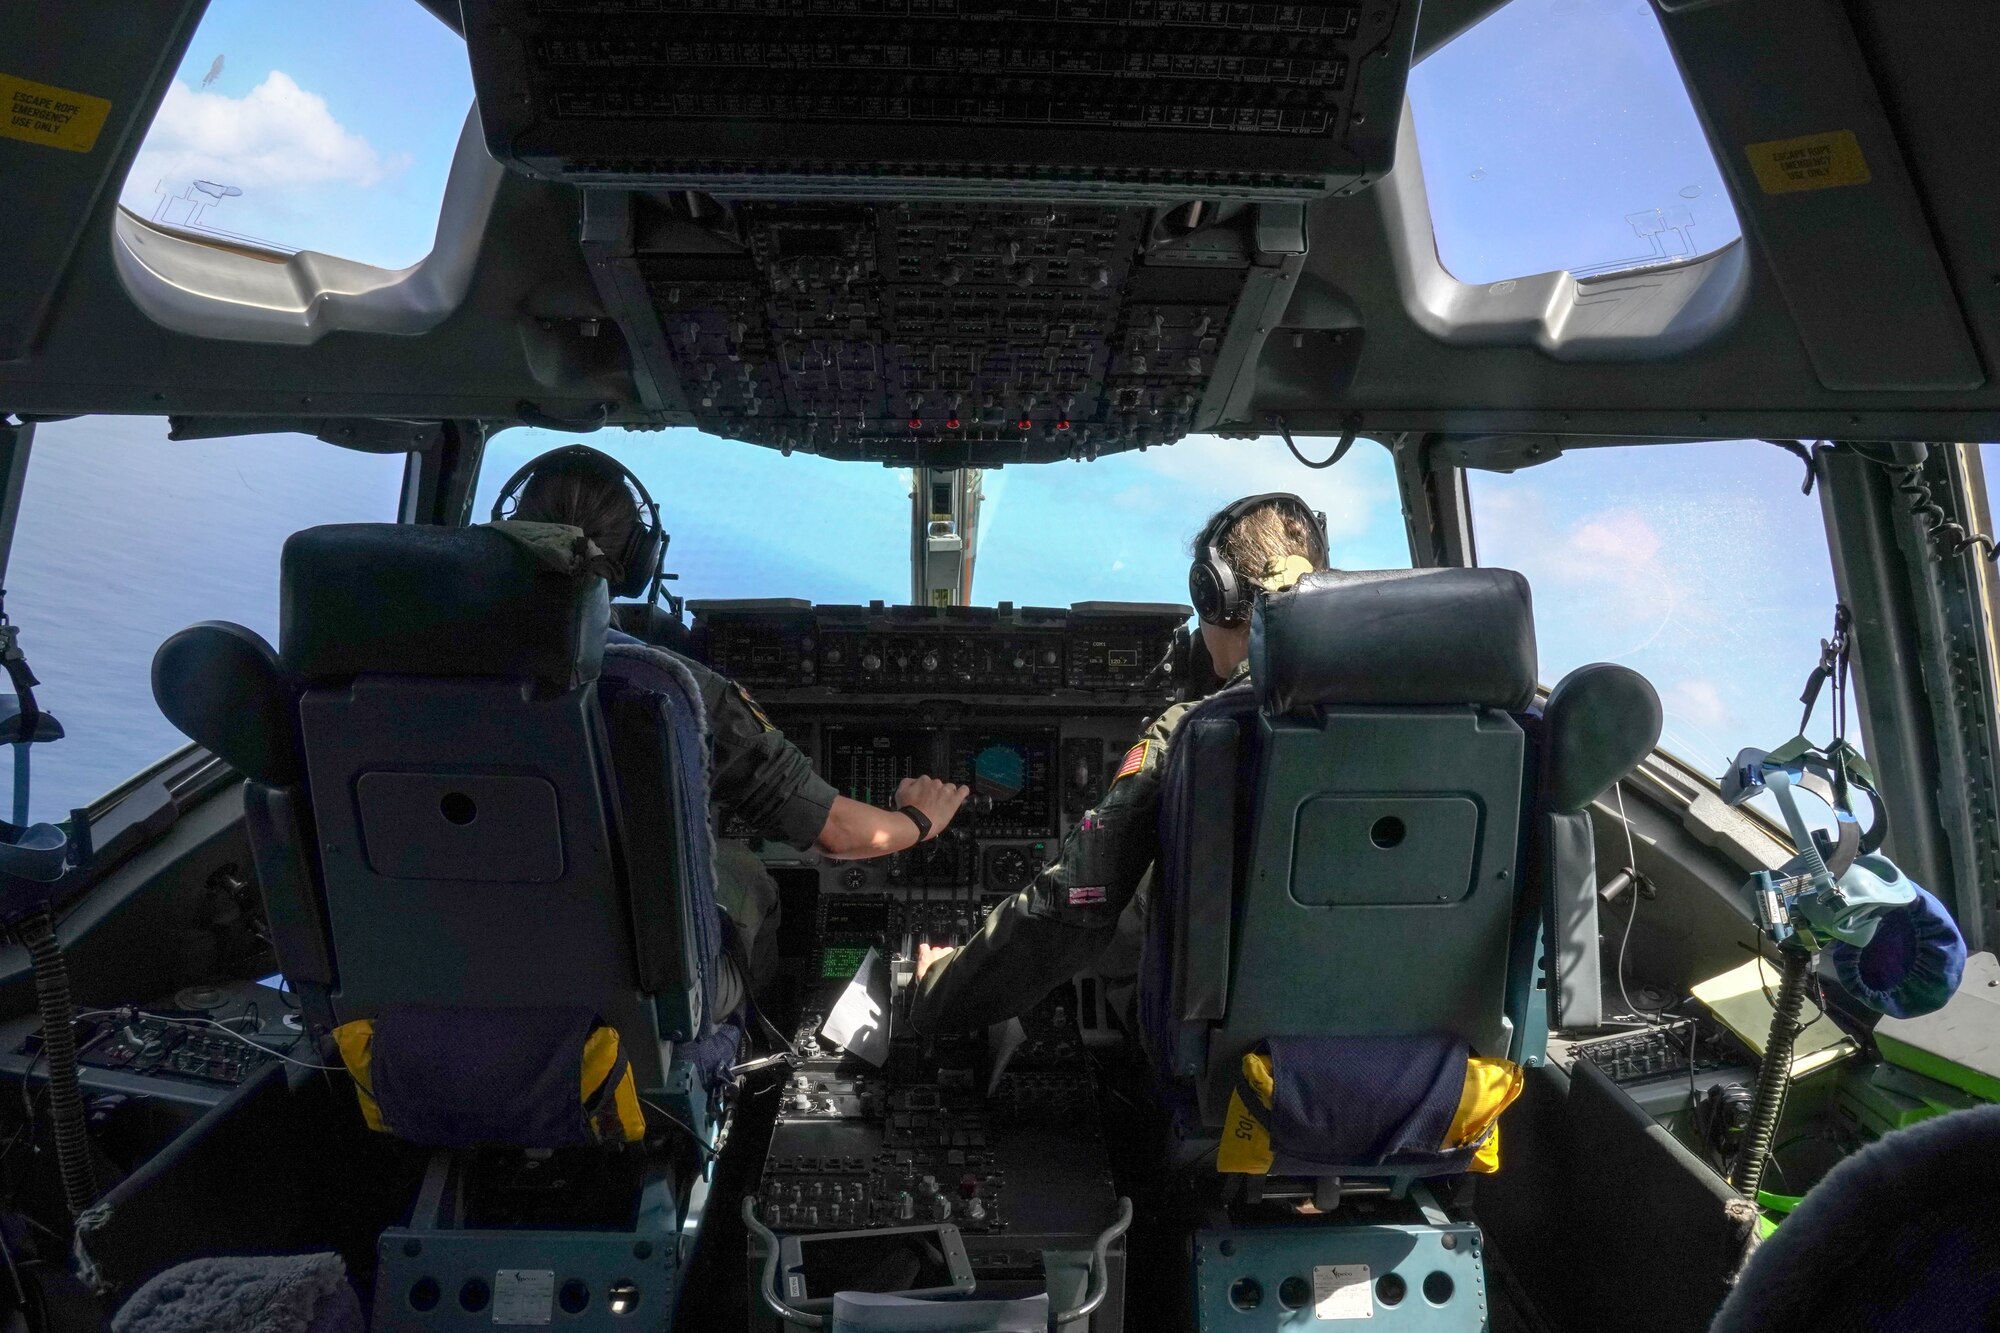 Majs. Brandee Taylor and Jacqueline Cushing, both 535th Airlift Squadron instructor pilots, conduct a training mission around the Hawaiian Islands March 25, 2021. Women from the 535th Airlift Squadron conducted an all-female flight in honor of Women’s History Month celebrating the contributions of female airmen. Women first entered pilot training in 1976 and currently make up 21 percent of the Air Force. (U.S. Air Force photo by Airman 1st Class Makensie Cooper)